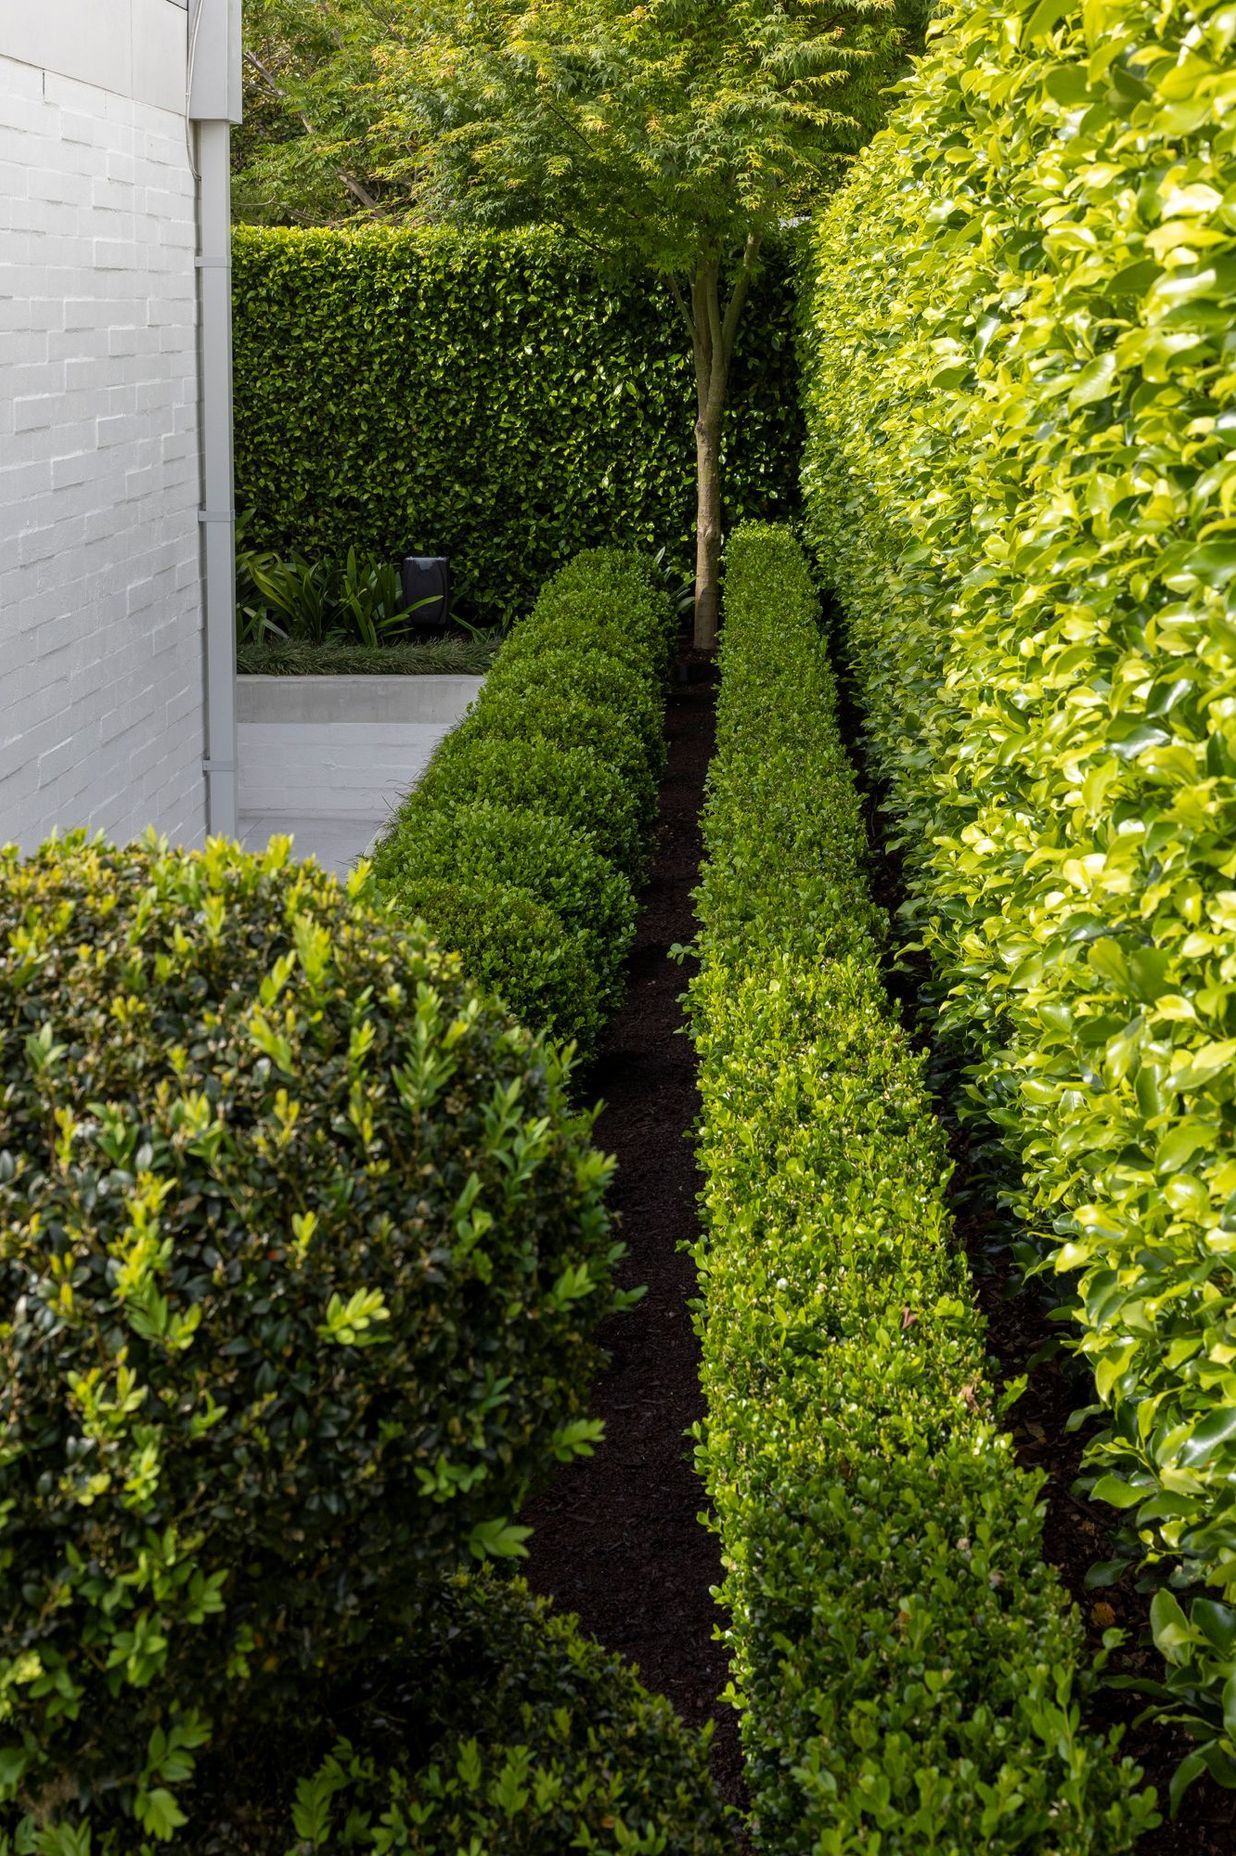 Hedges and lines of buxus green gem topiary balls add an element of structure to the garden.